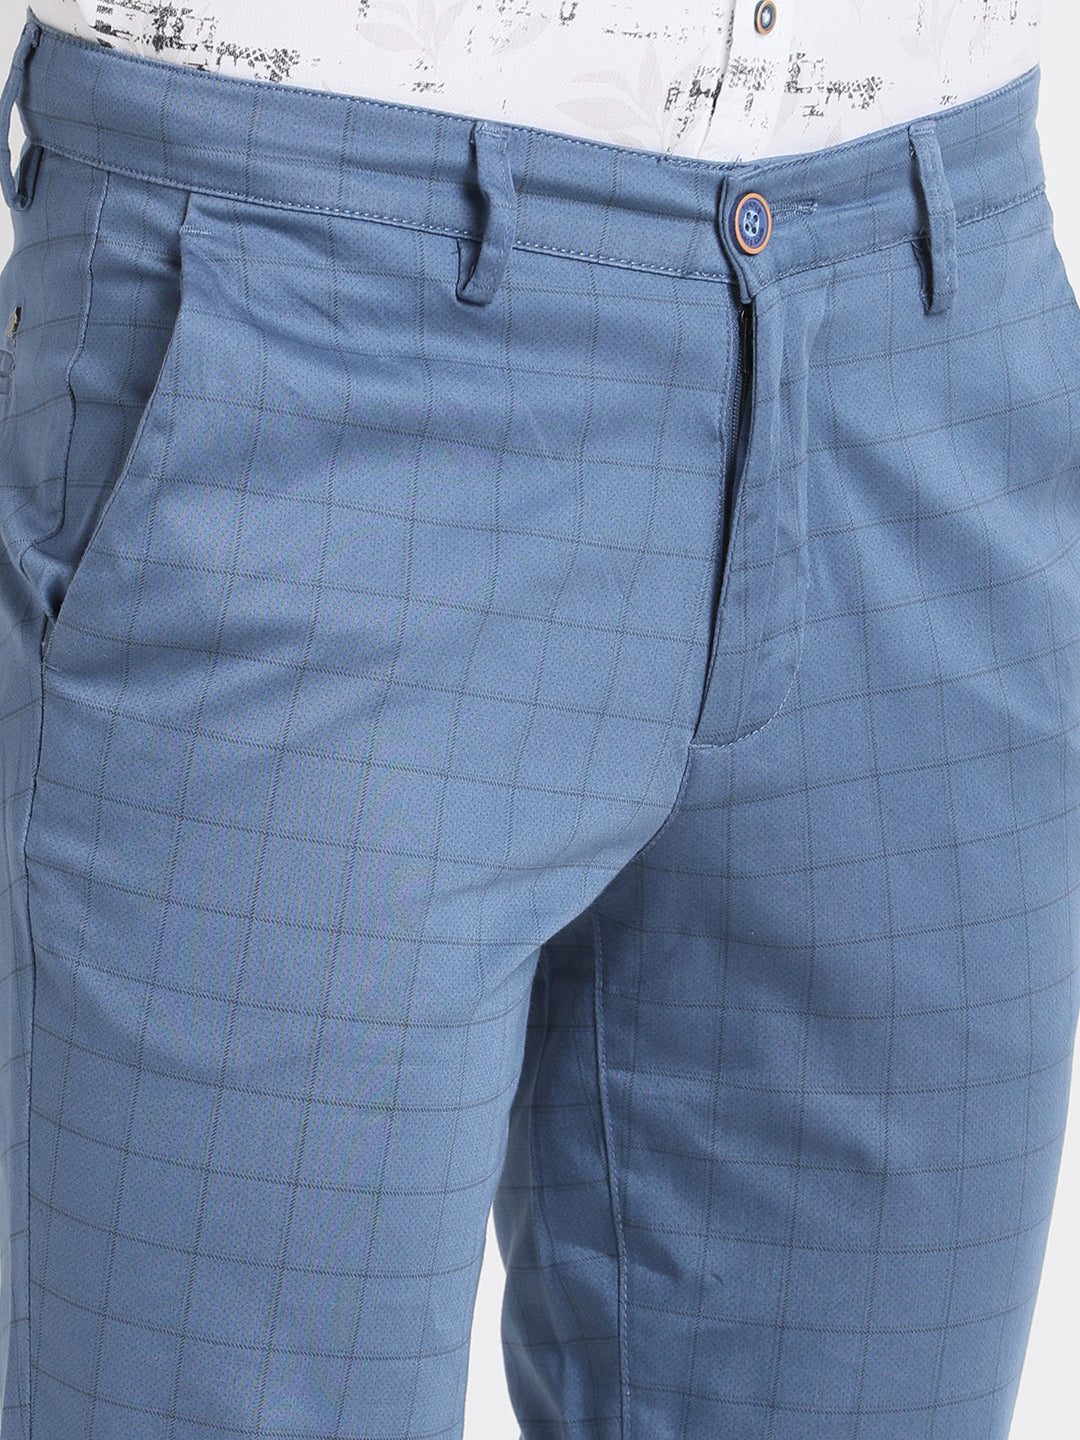 Cotton Stretch Blue Checkered Narrow Fit Flat Front Casual Trouser